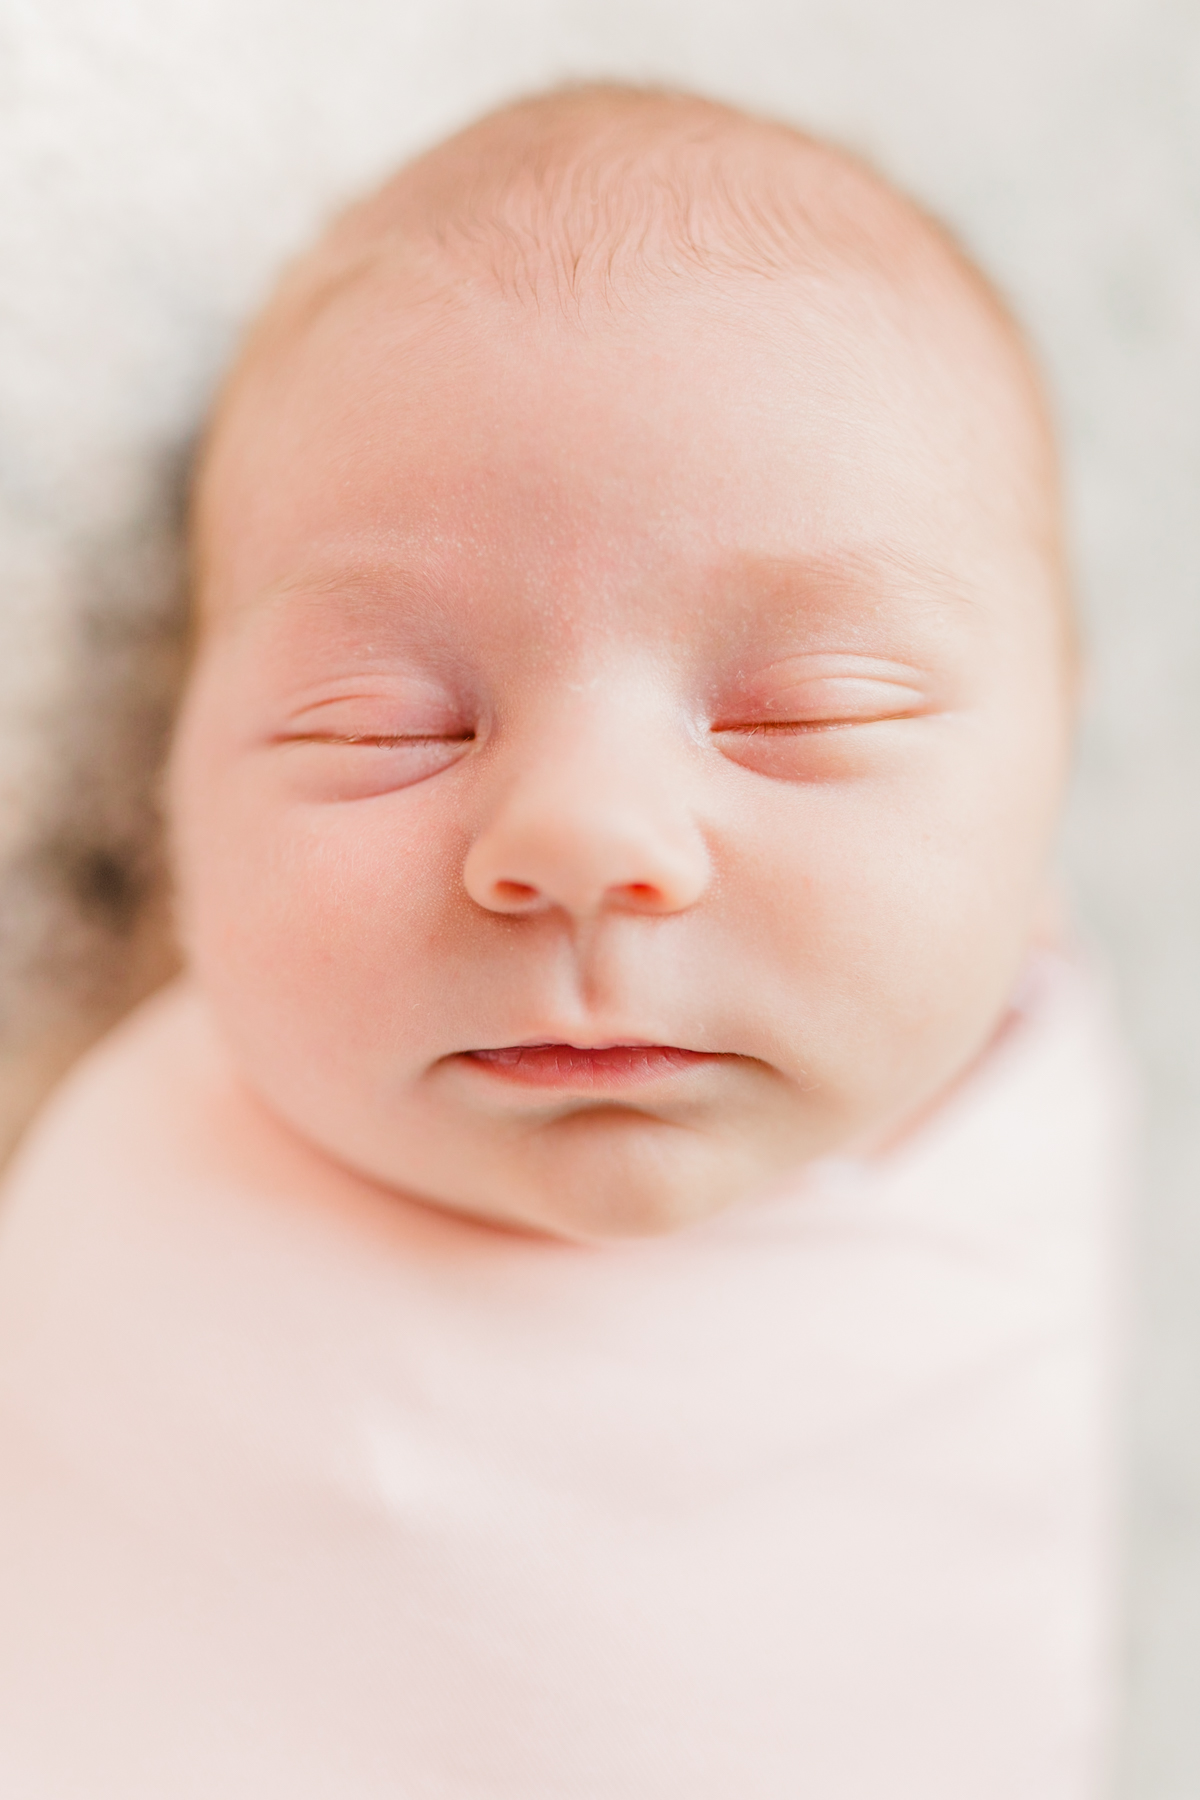 Boston Fertility Clinics | Close up of the face of a sleeping baby wrapped tightly in a light pink swaddle